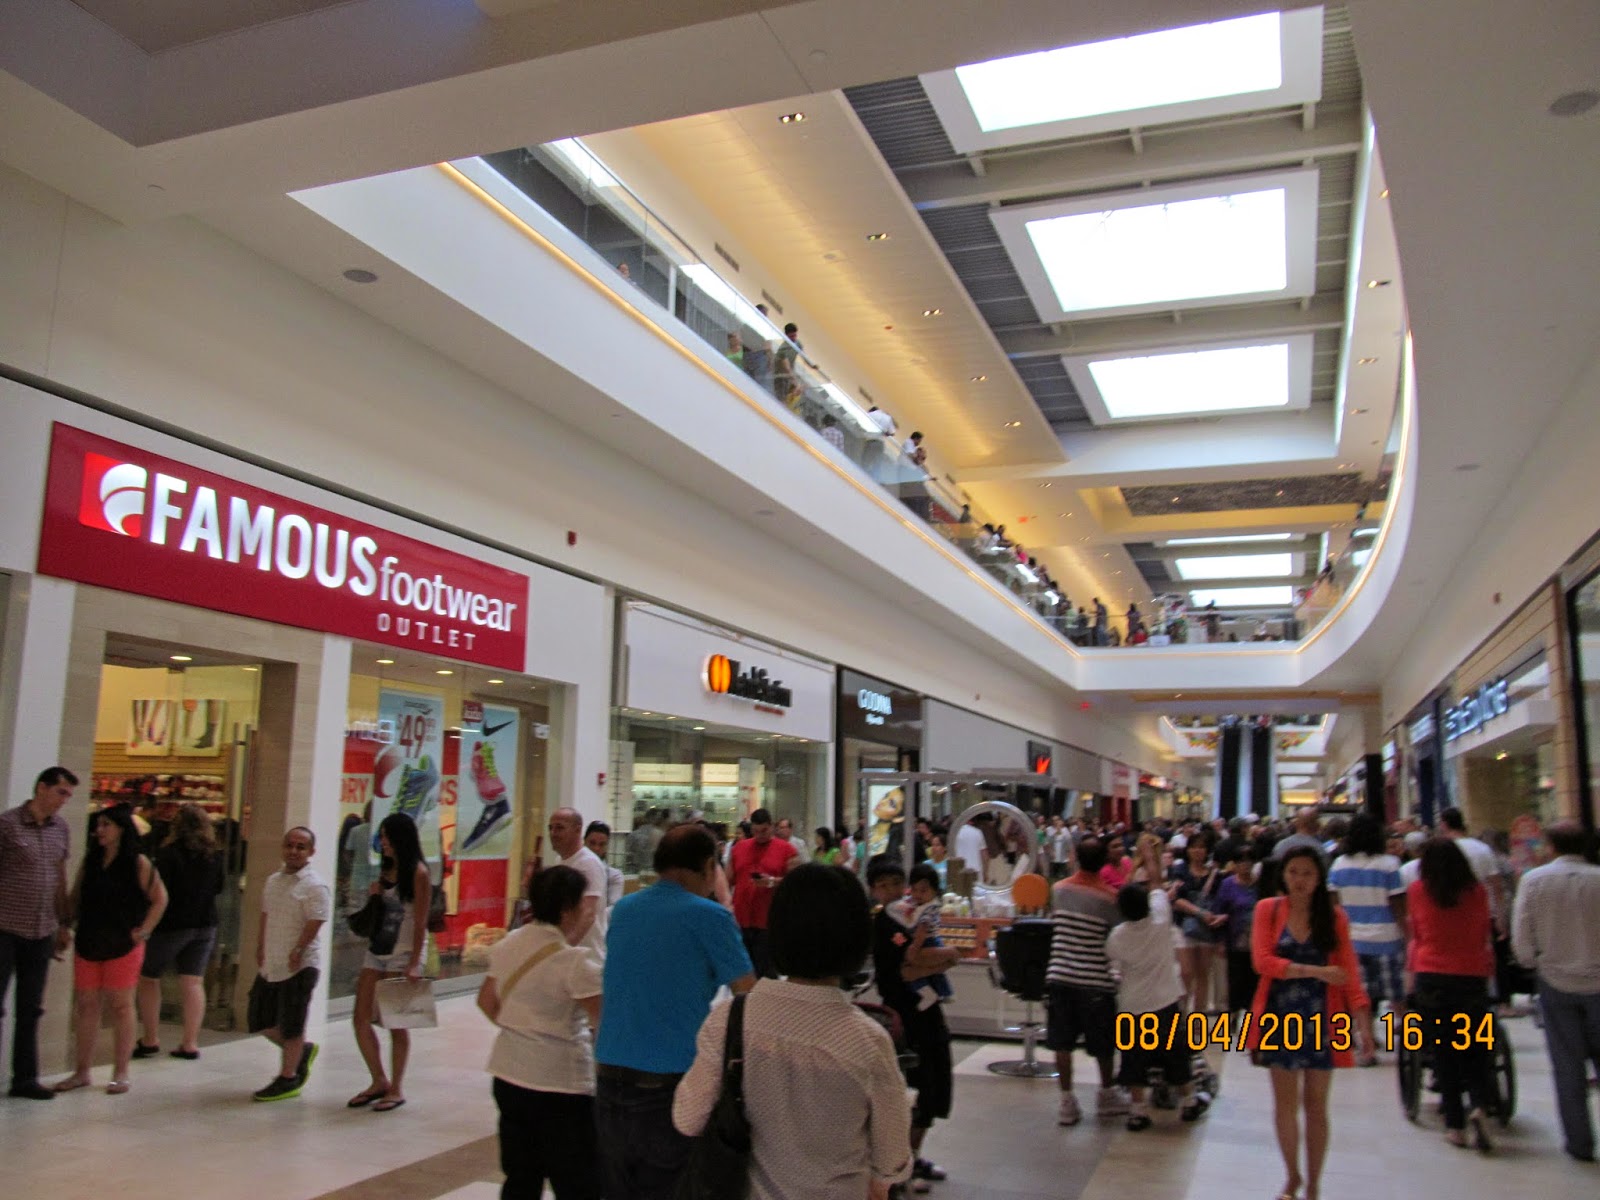 Trip to the Mall: Fashion Outlets of Chicago- (Rosemont, IL)